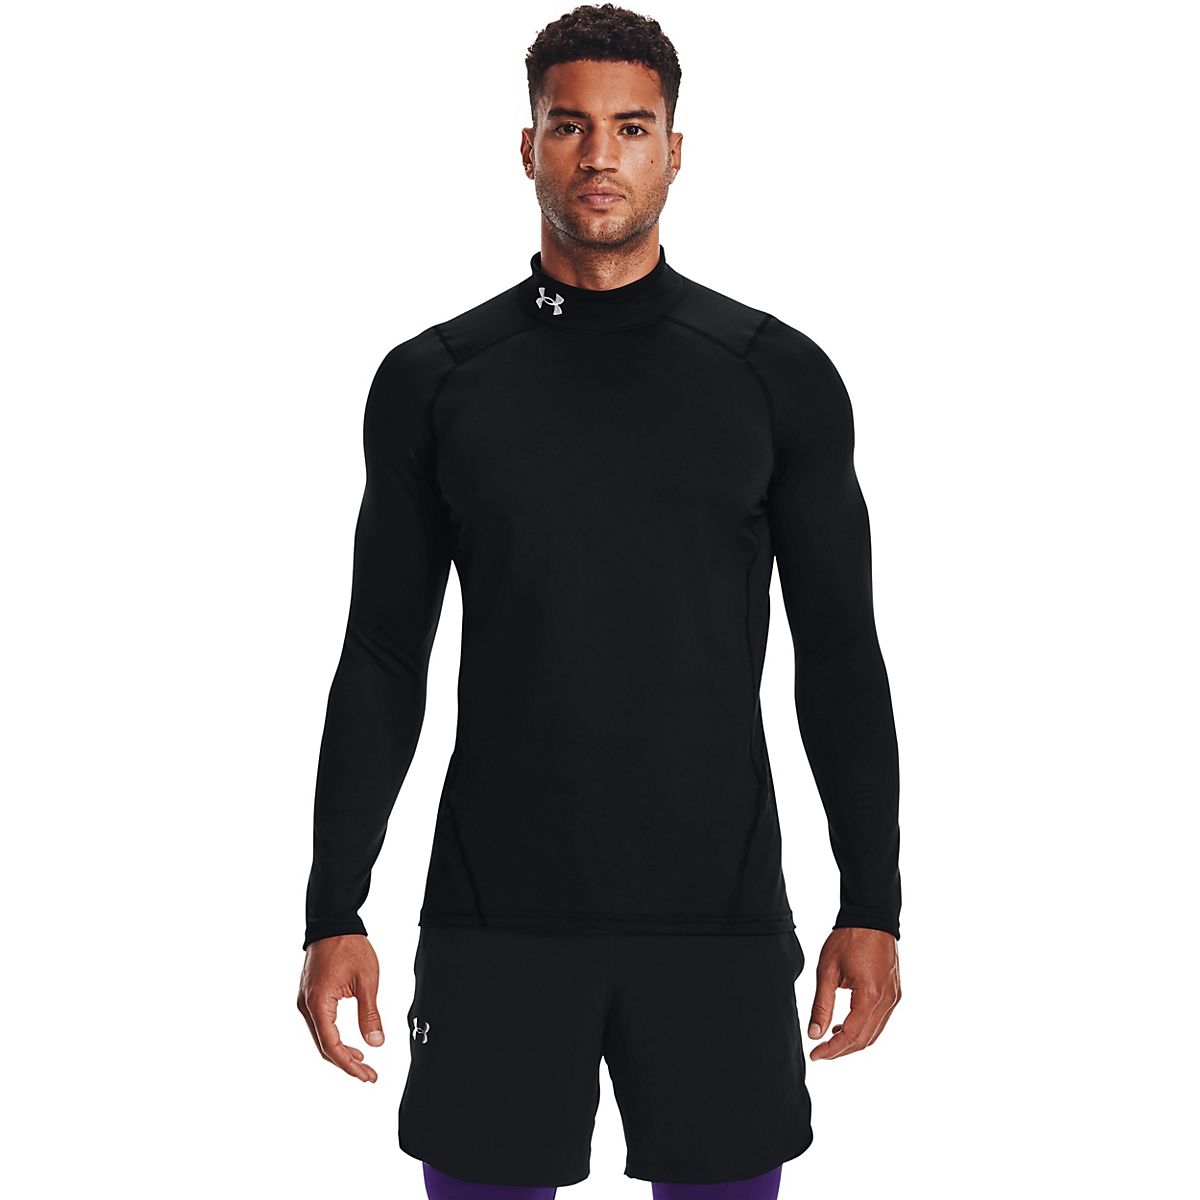 Under Armour Men's CG Armour Fitted Mock Long Sleeve Top